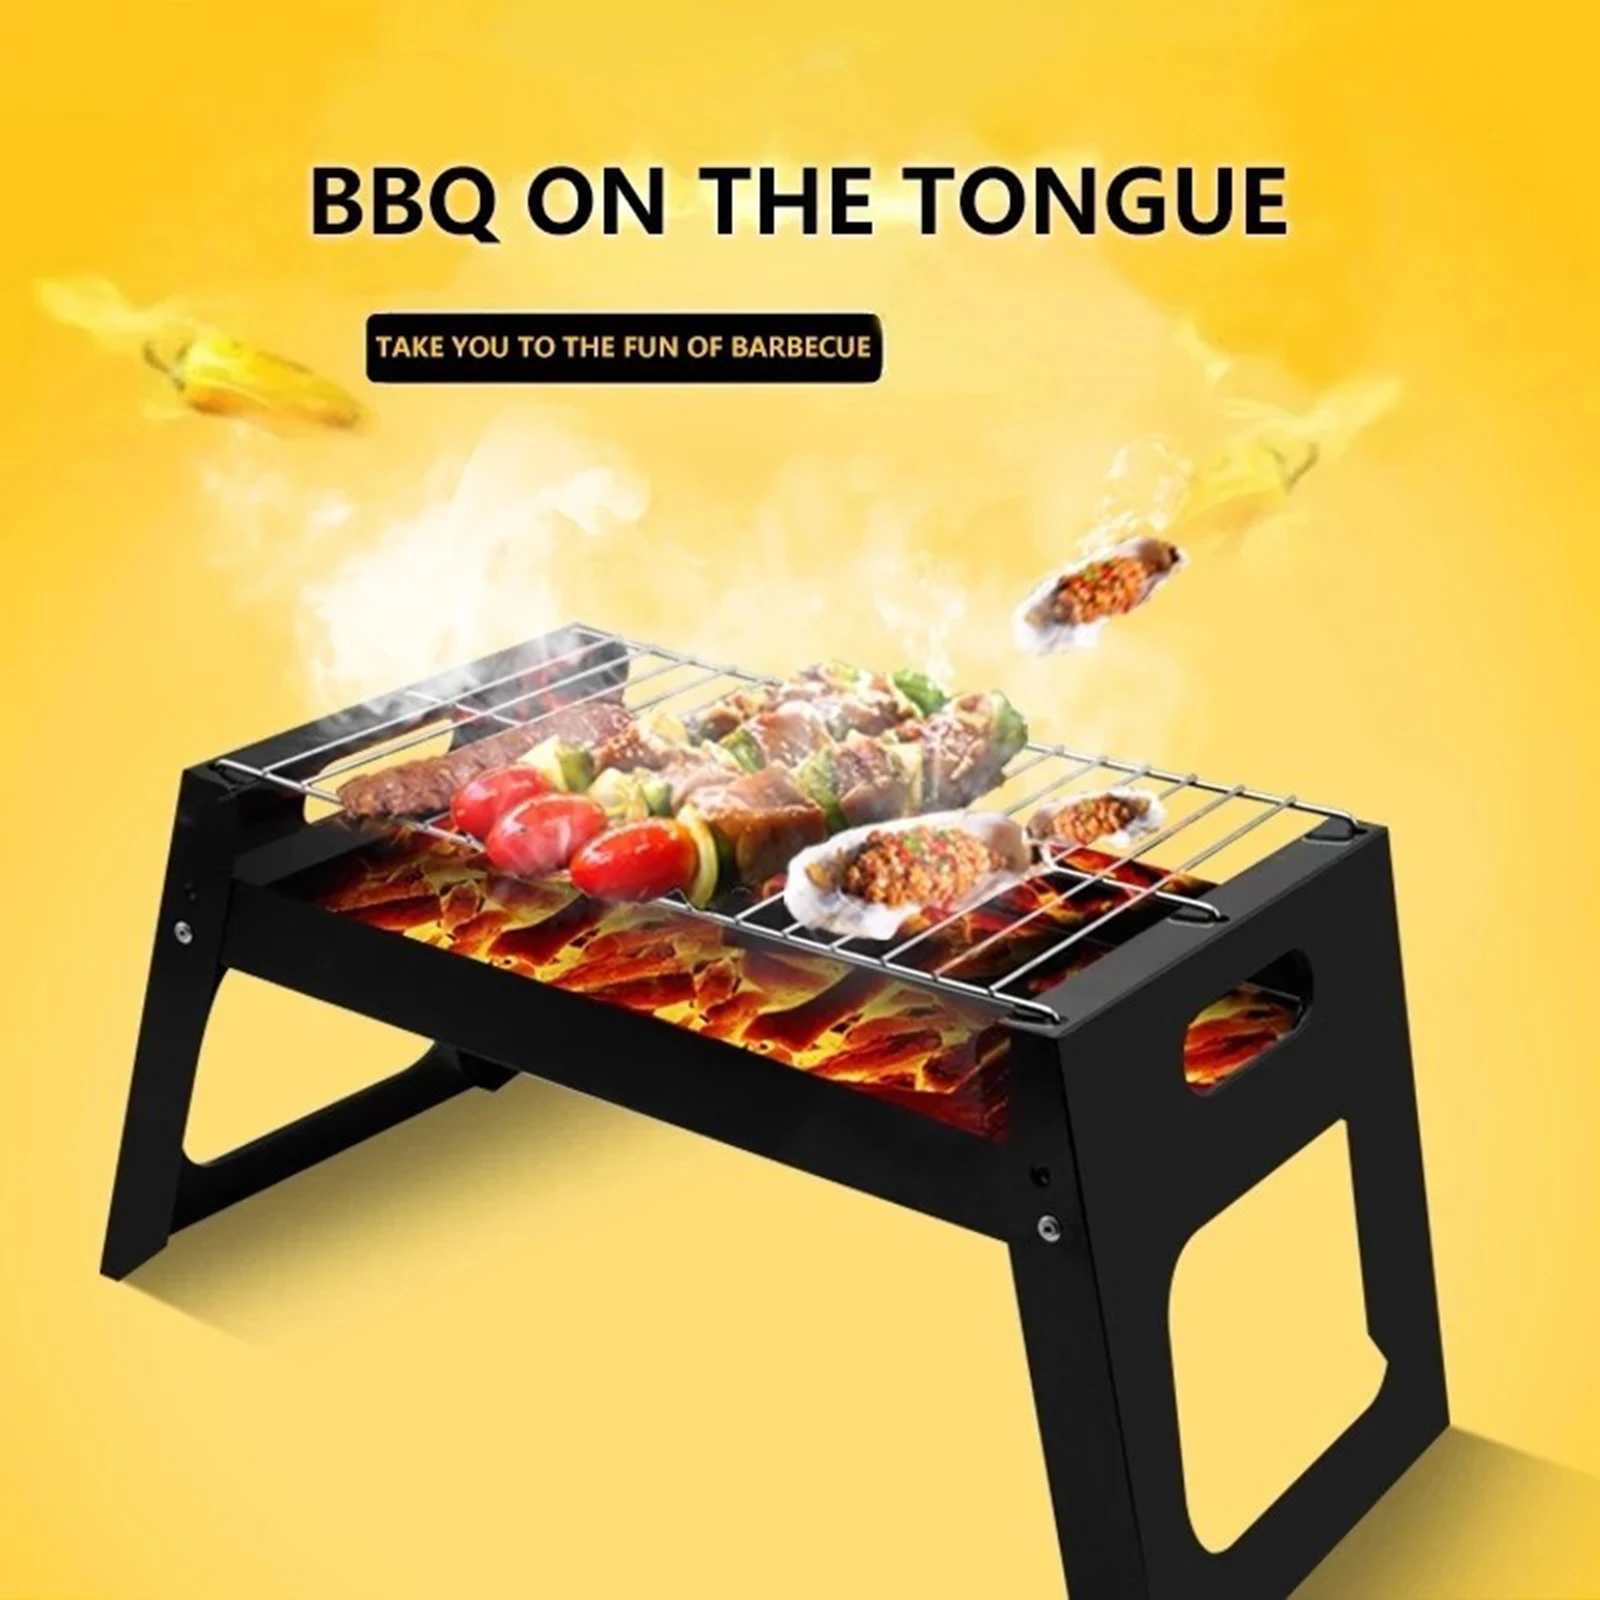 Folding BBQ Grill Portable Compact Charcoal Barbecue BBQ Grill Cooker Bars Smoker Outdoor Camping 27.5x38.5x29 cm 8